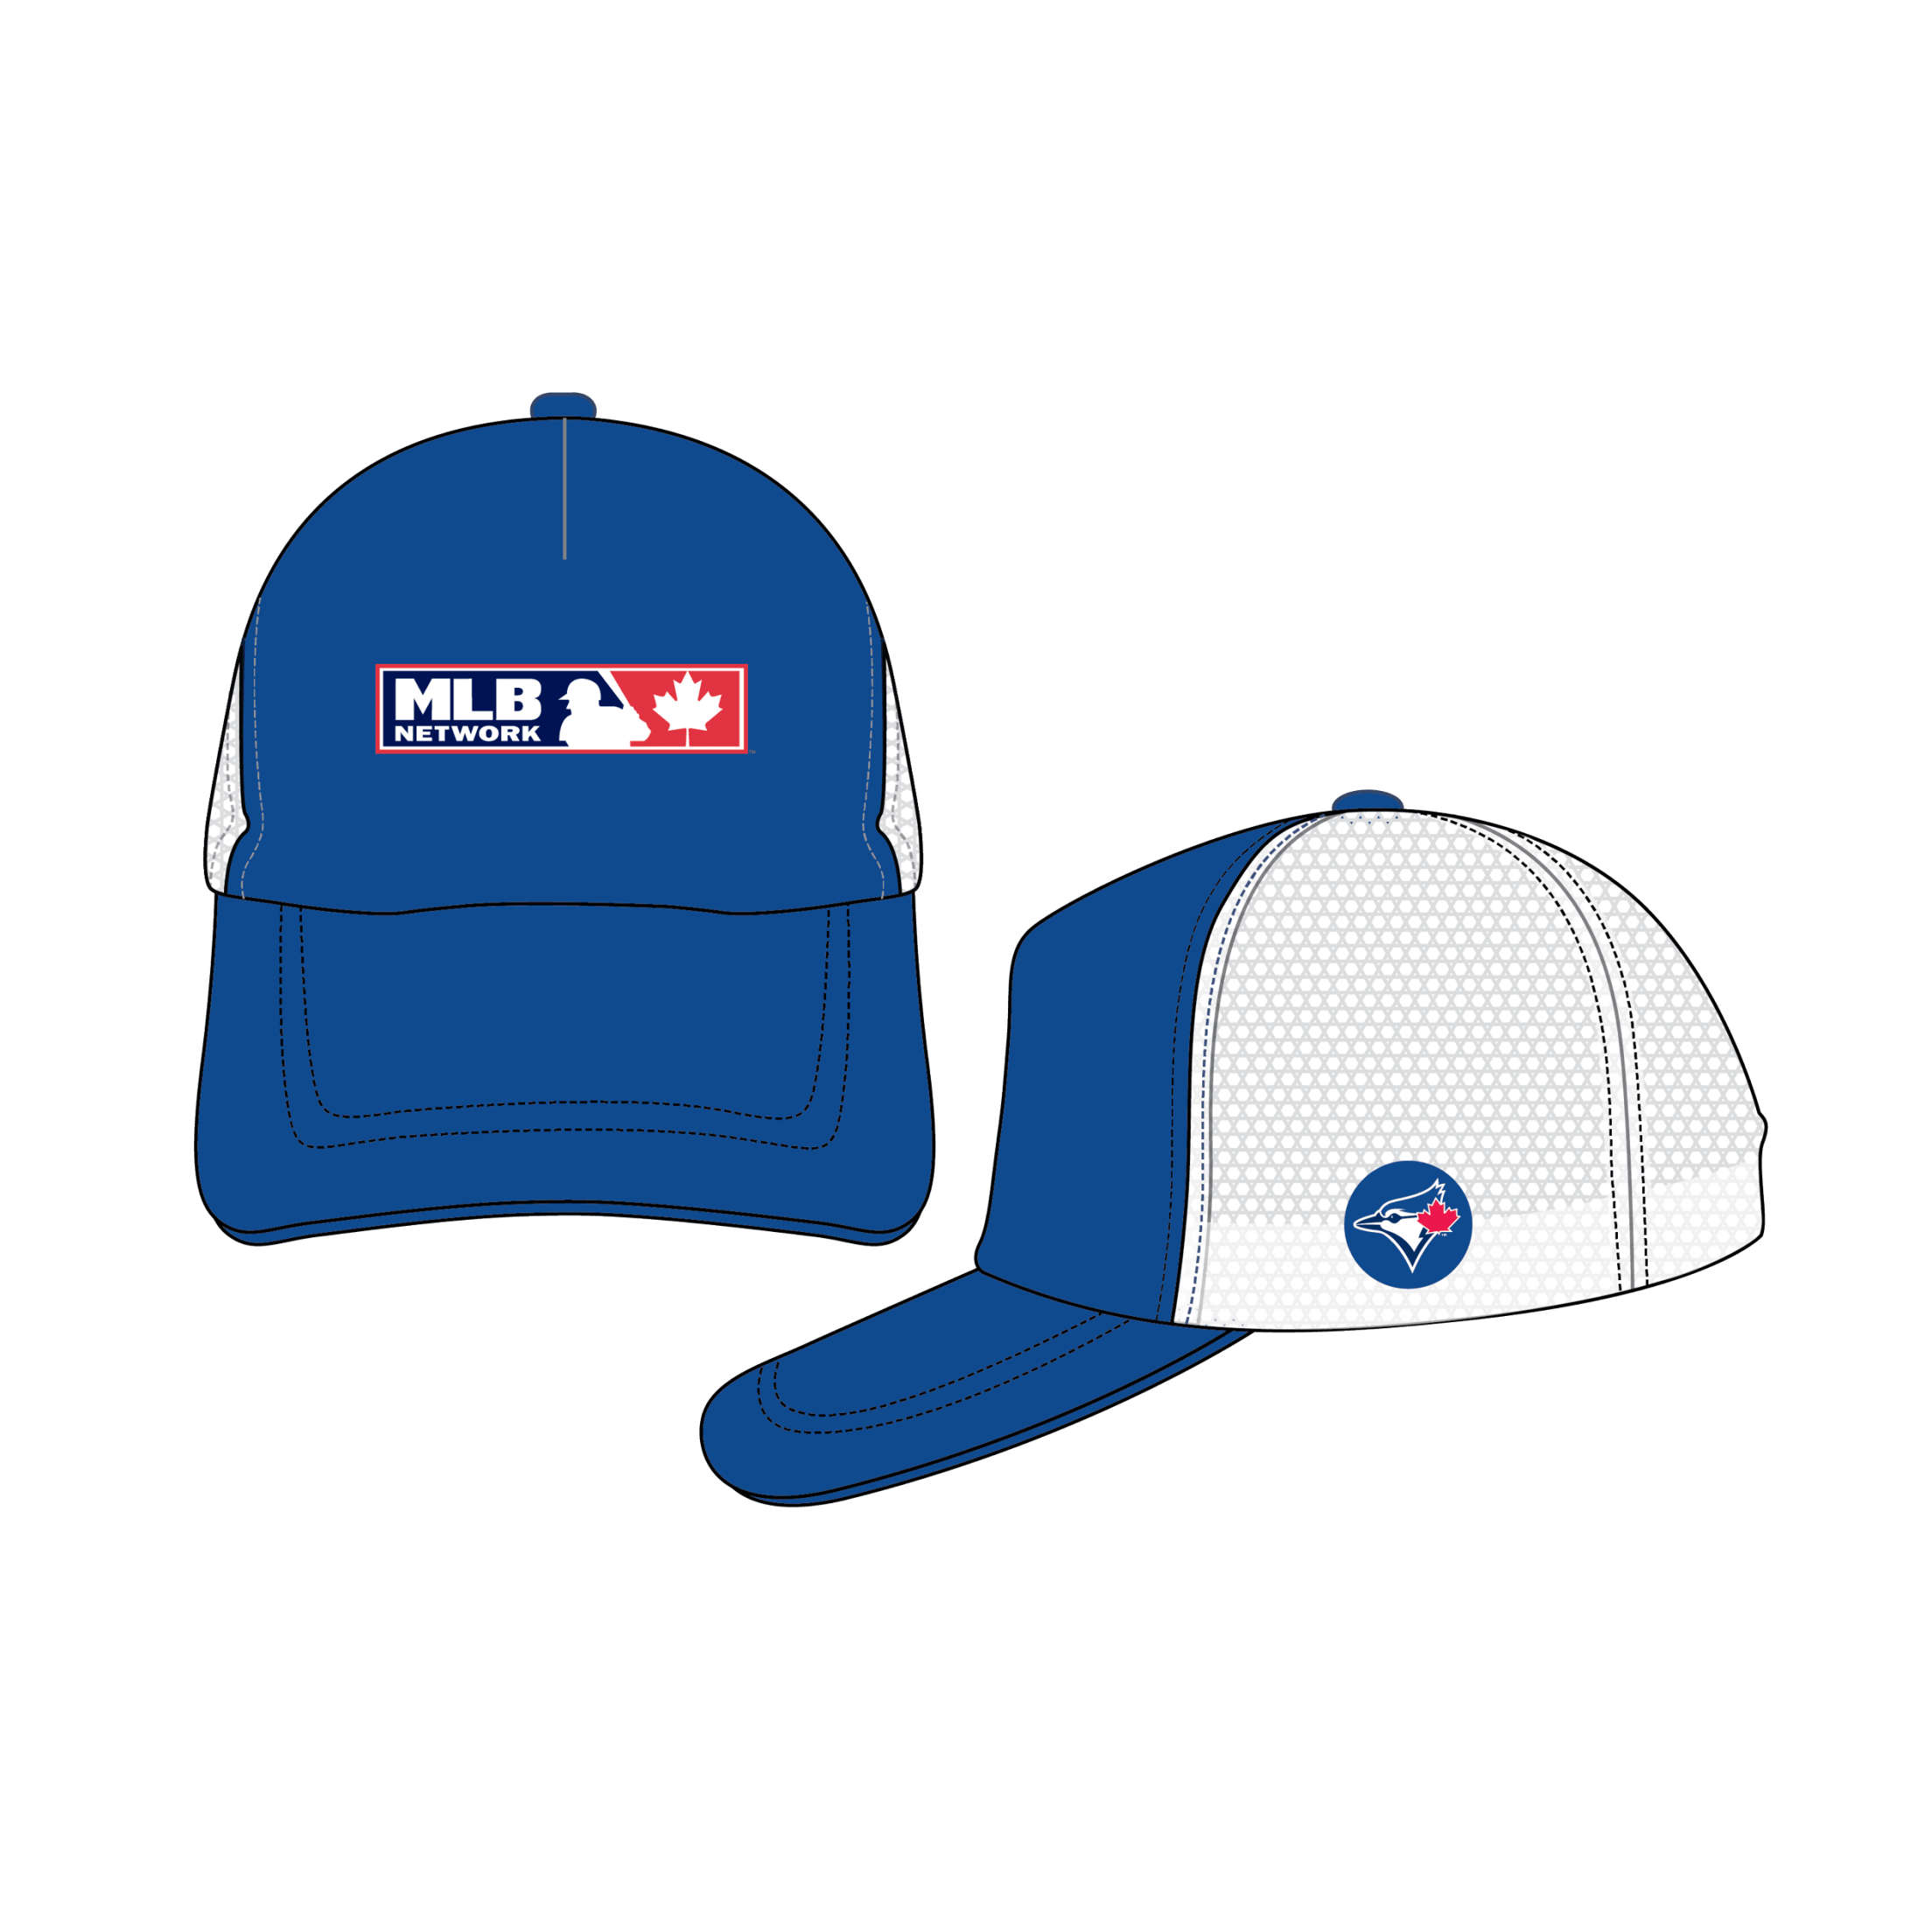 Unique Items and Wearables | Theme Days | Tickets | Toronto Blue Jays